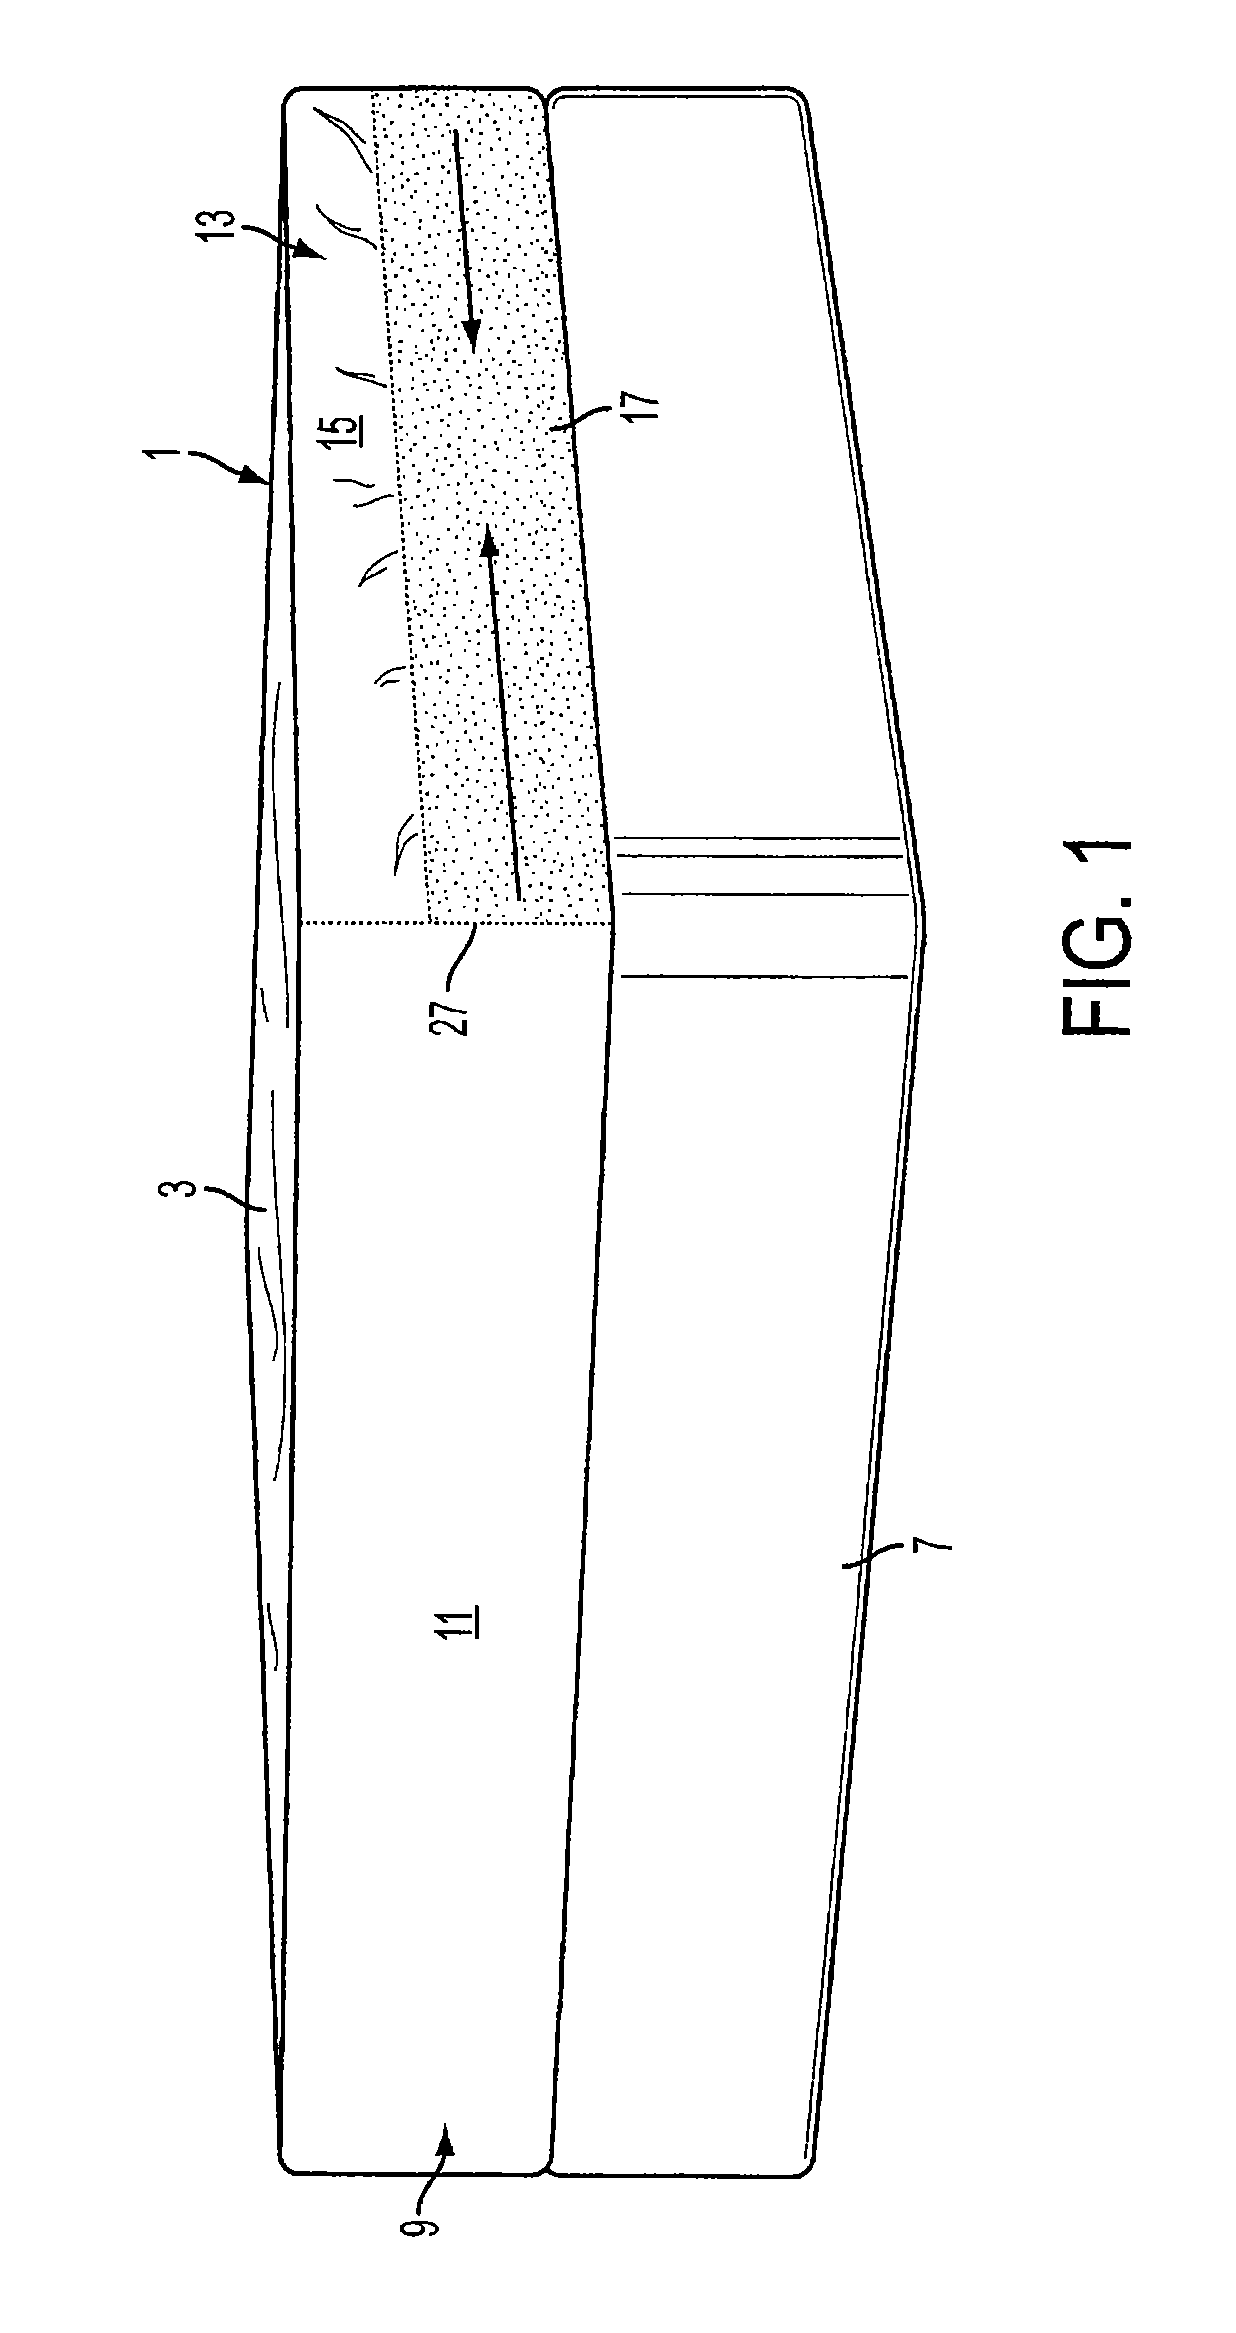 Method of imparting mattress gripping stretchability to a mattress cover